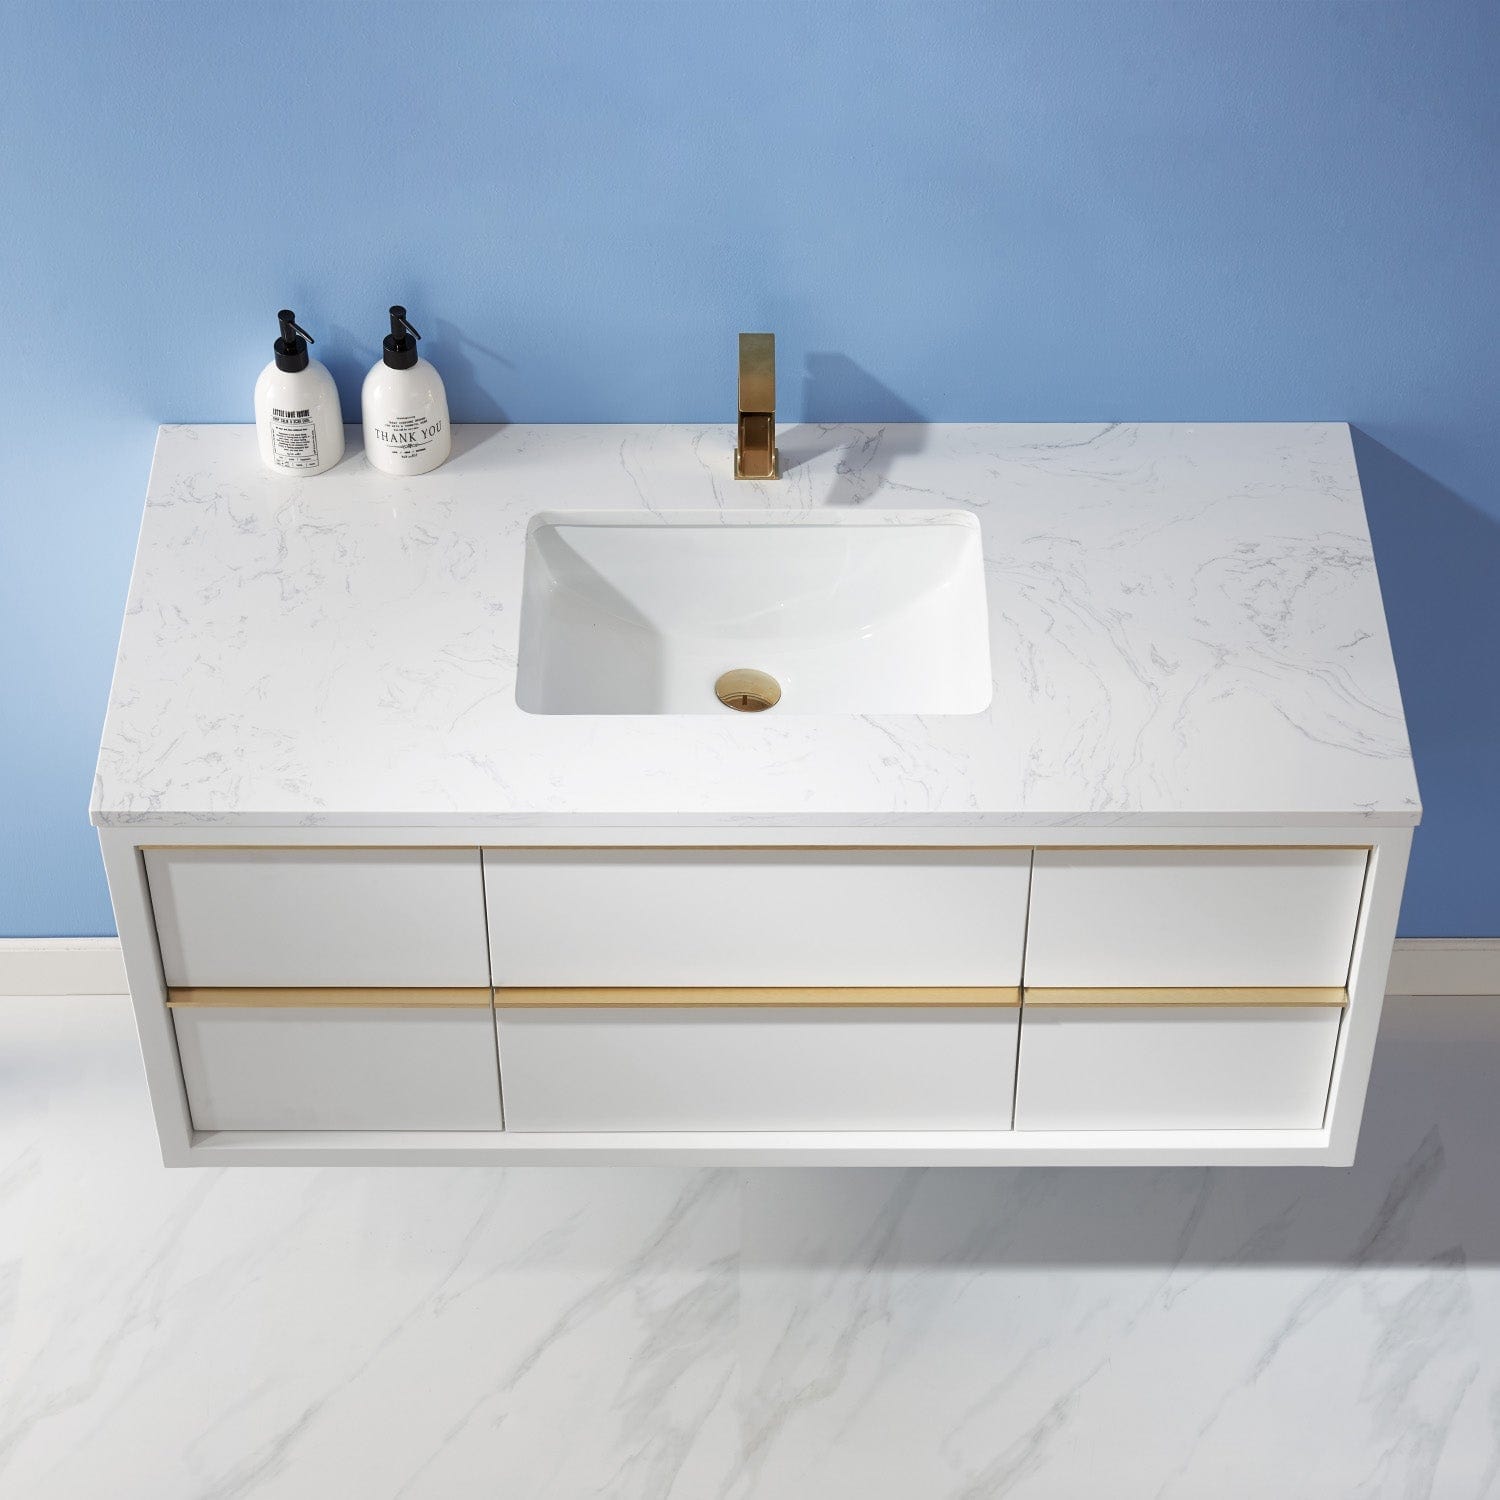 Altair Morgan 48" Single Bathroom Vanity Set in White and Composite Carrara White Stone Countertop without Mirror 534048-WH-AW-NM - Molaix631112971782Vanity534048-WH-AW-NM